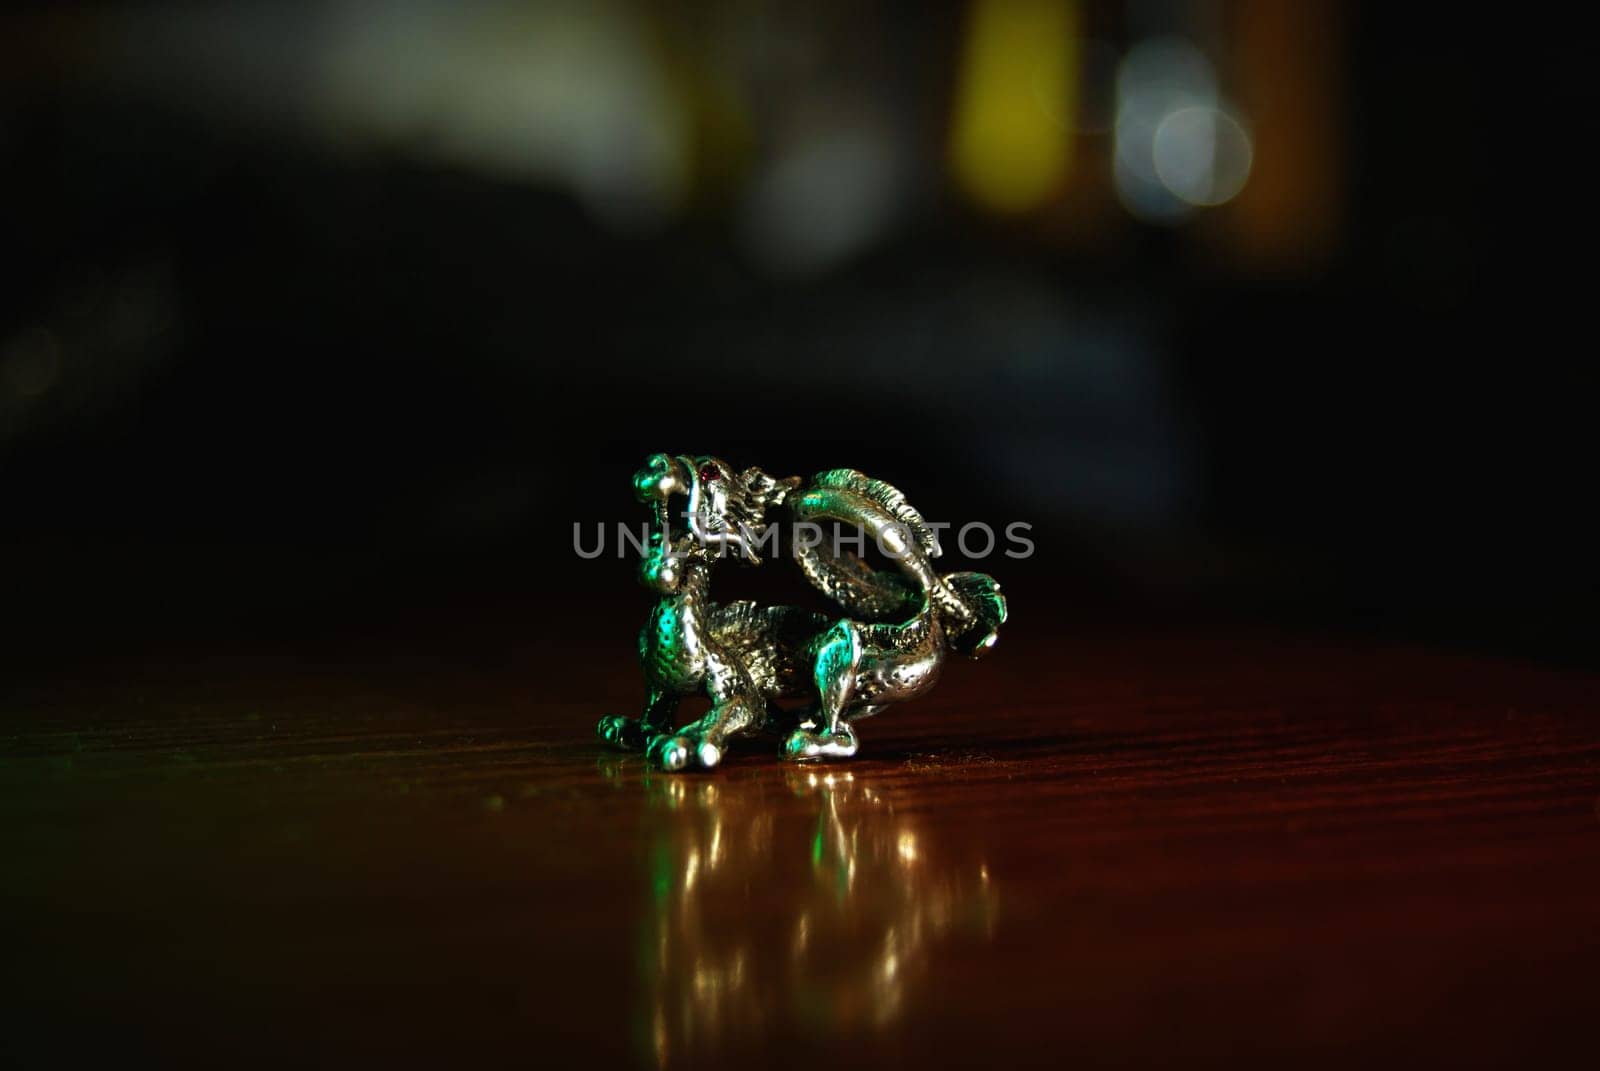 Dragon figurine with beautiful reflection and bokeh effect.